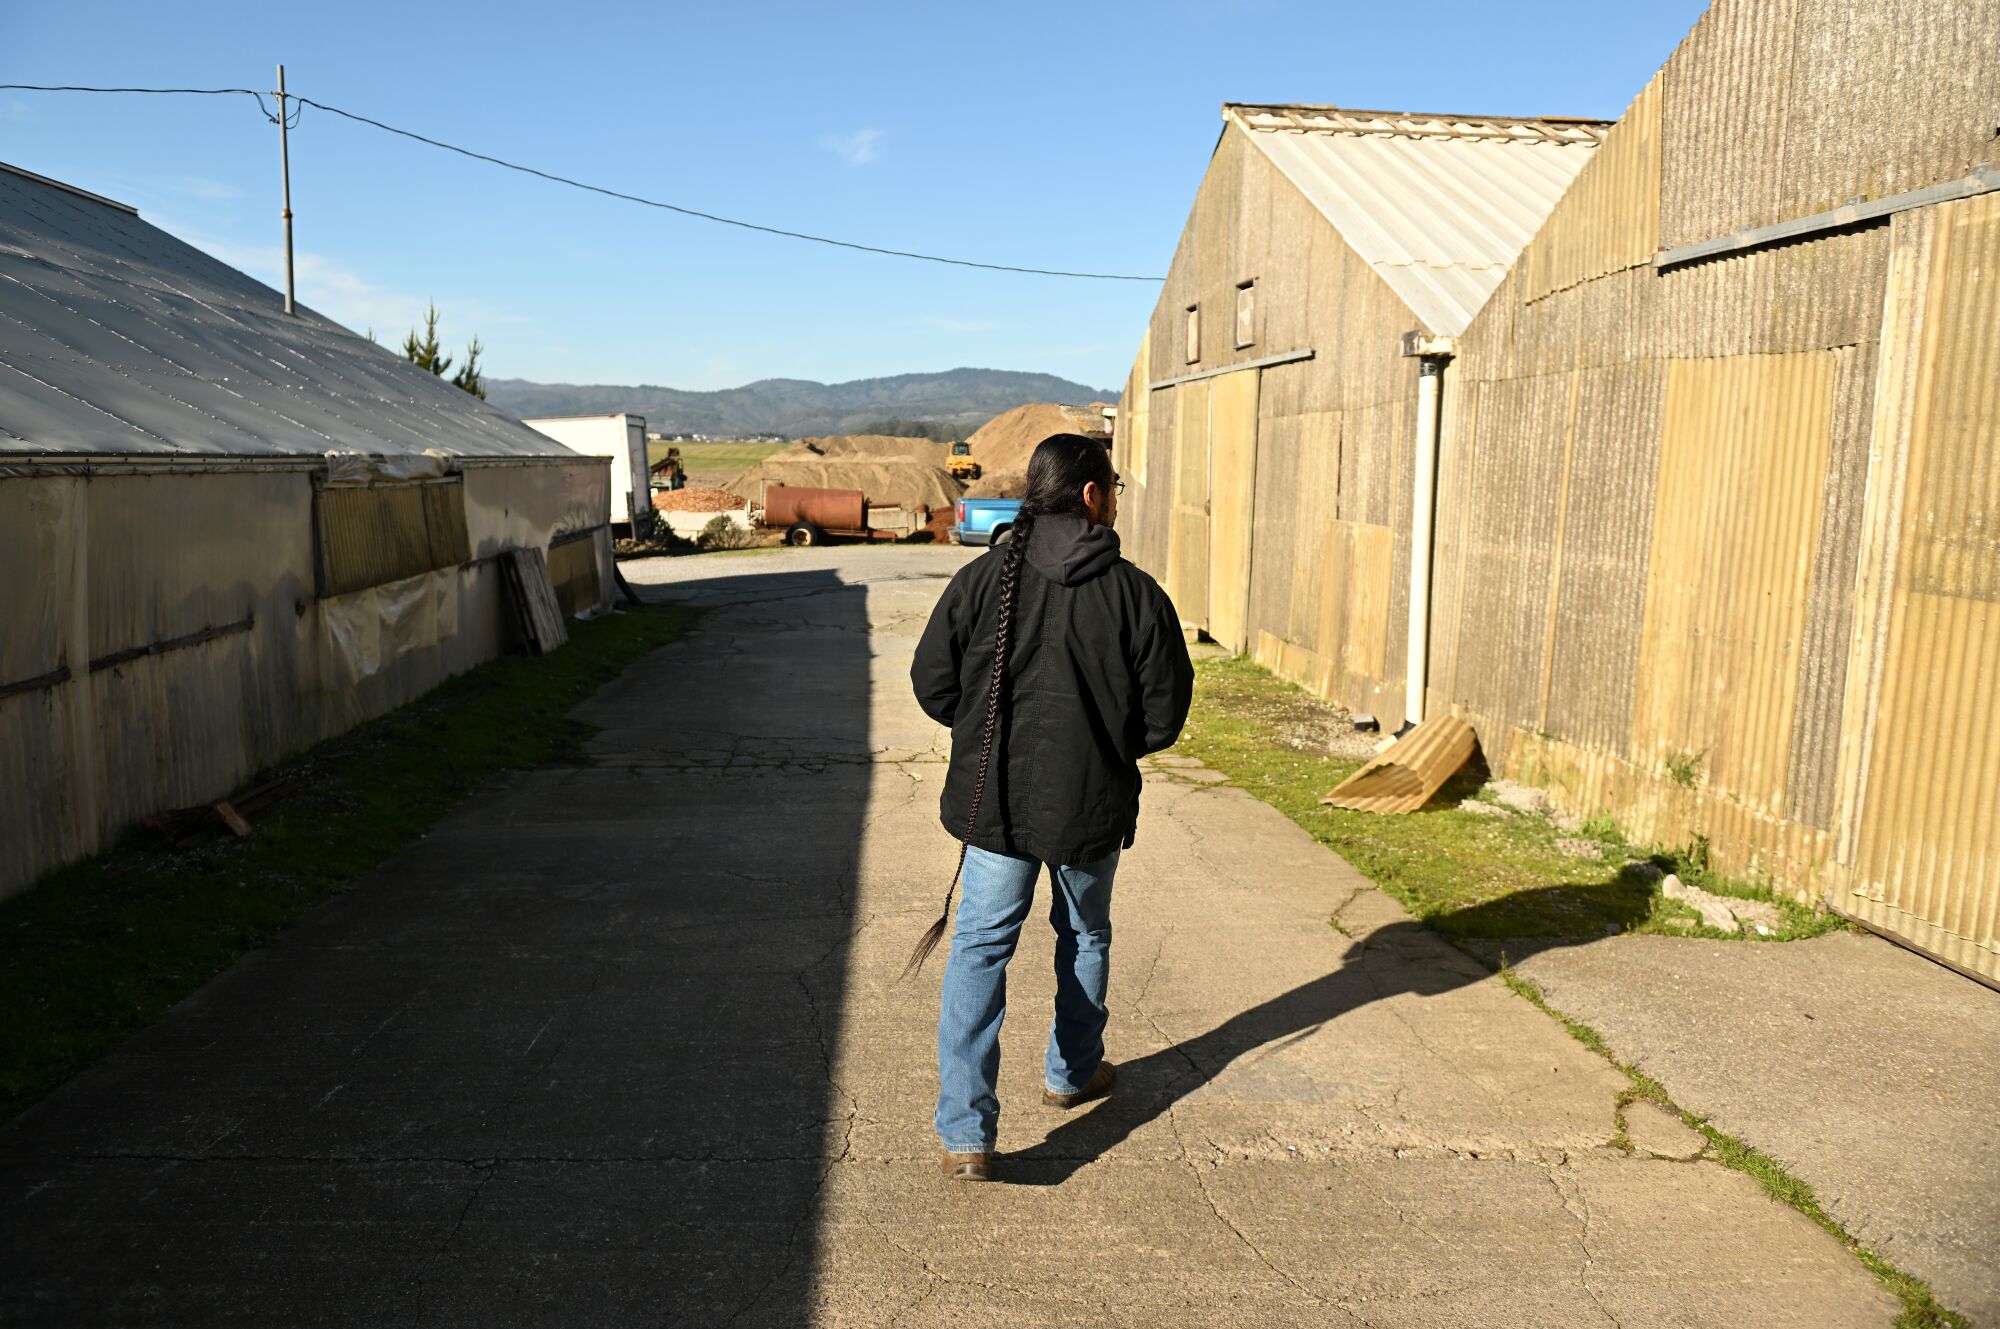 A man walks away from the camera between rows of metal roofed buildings